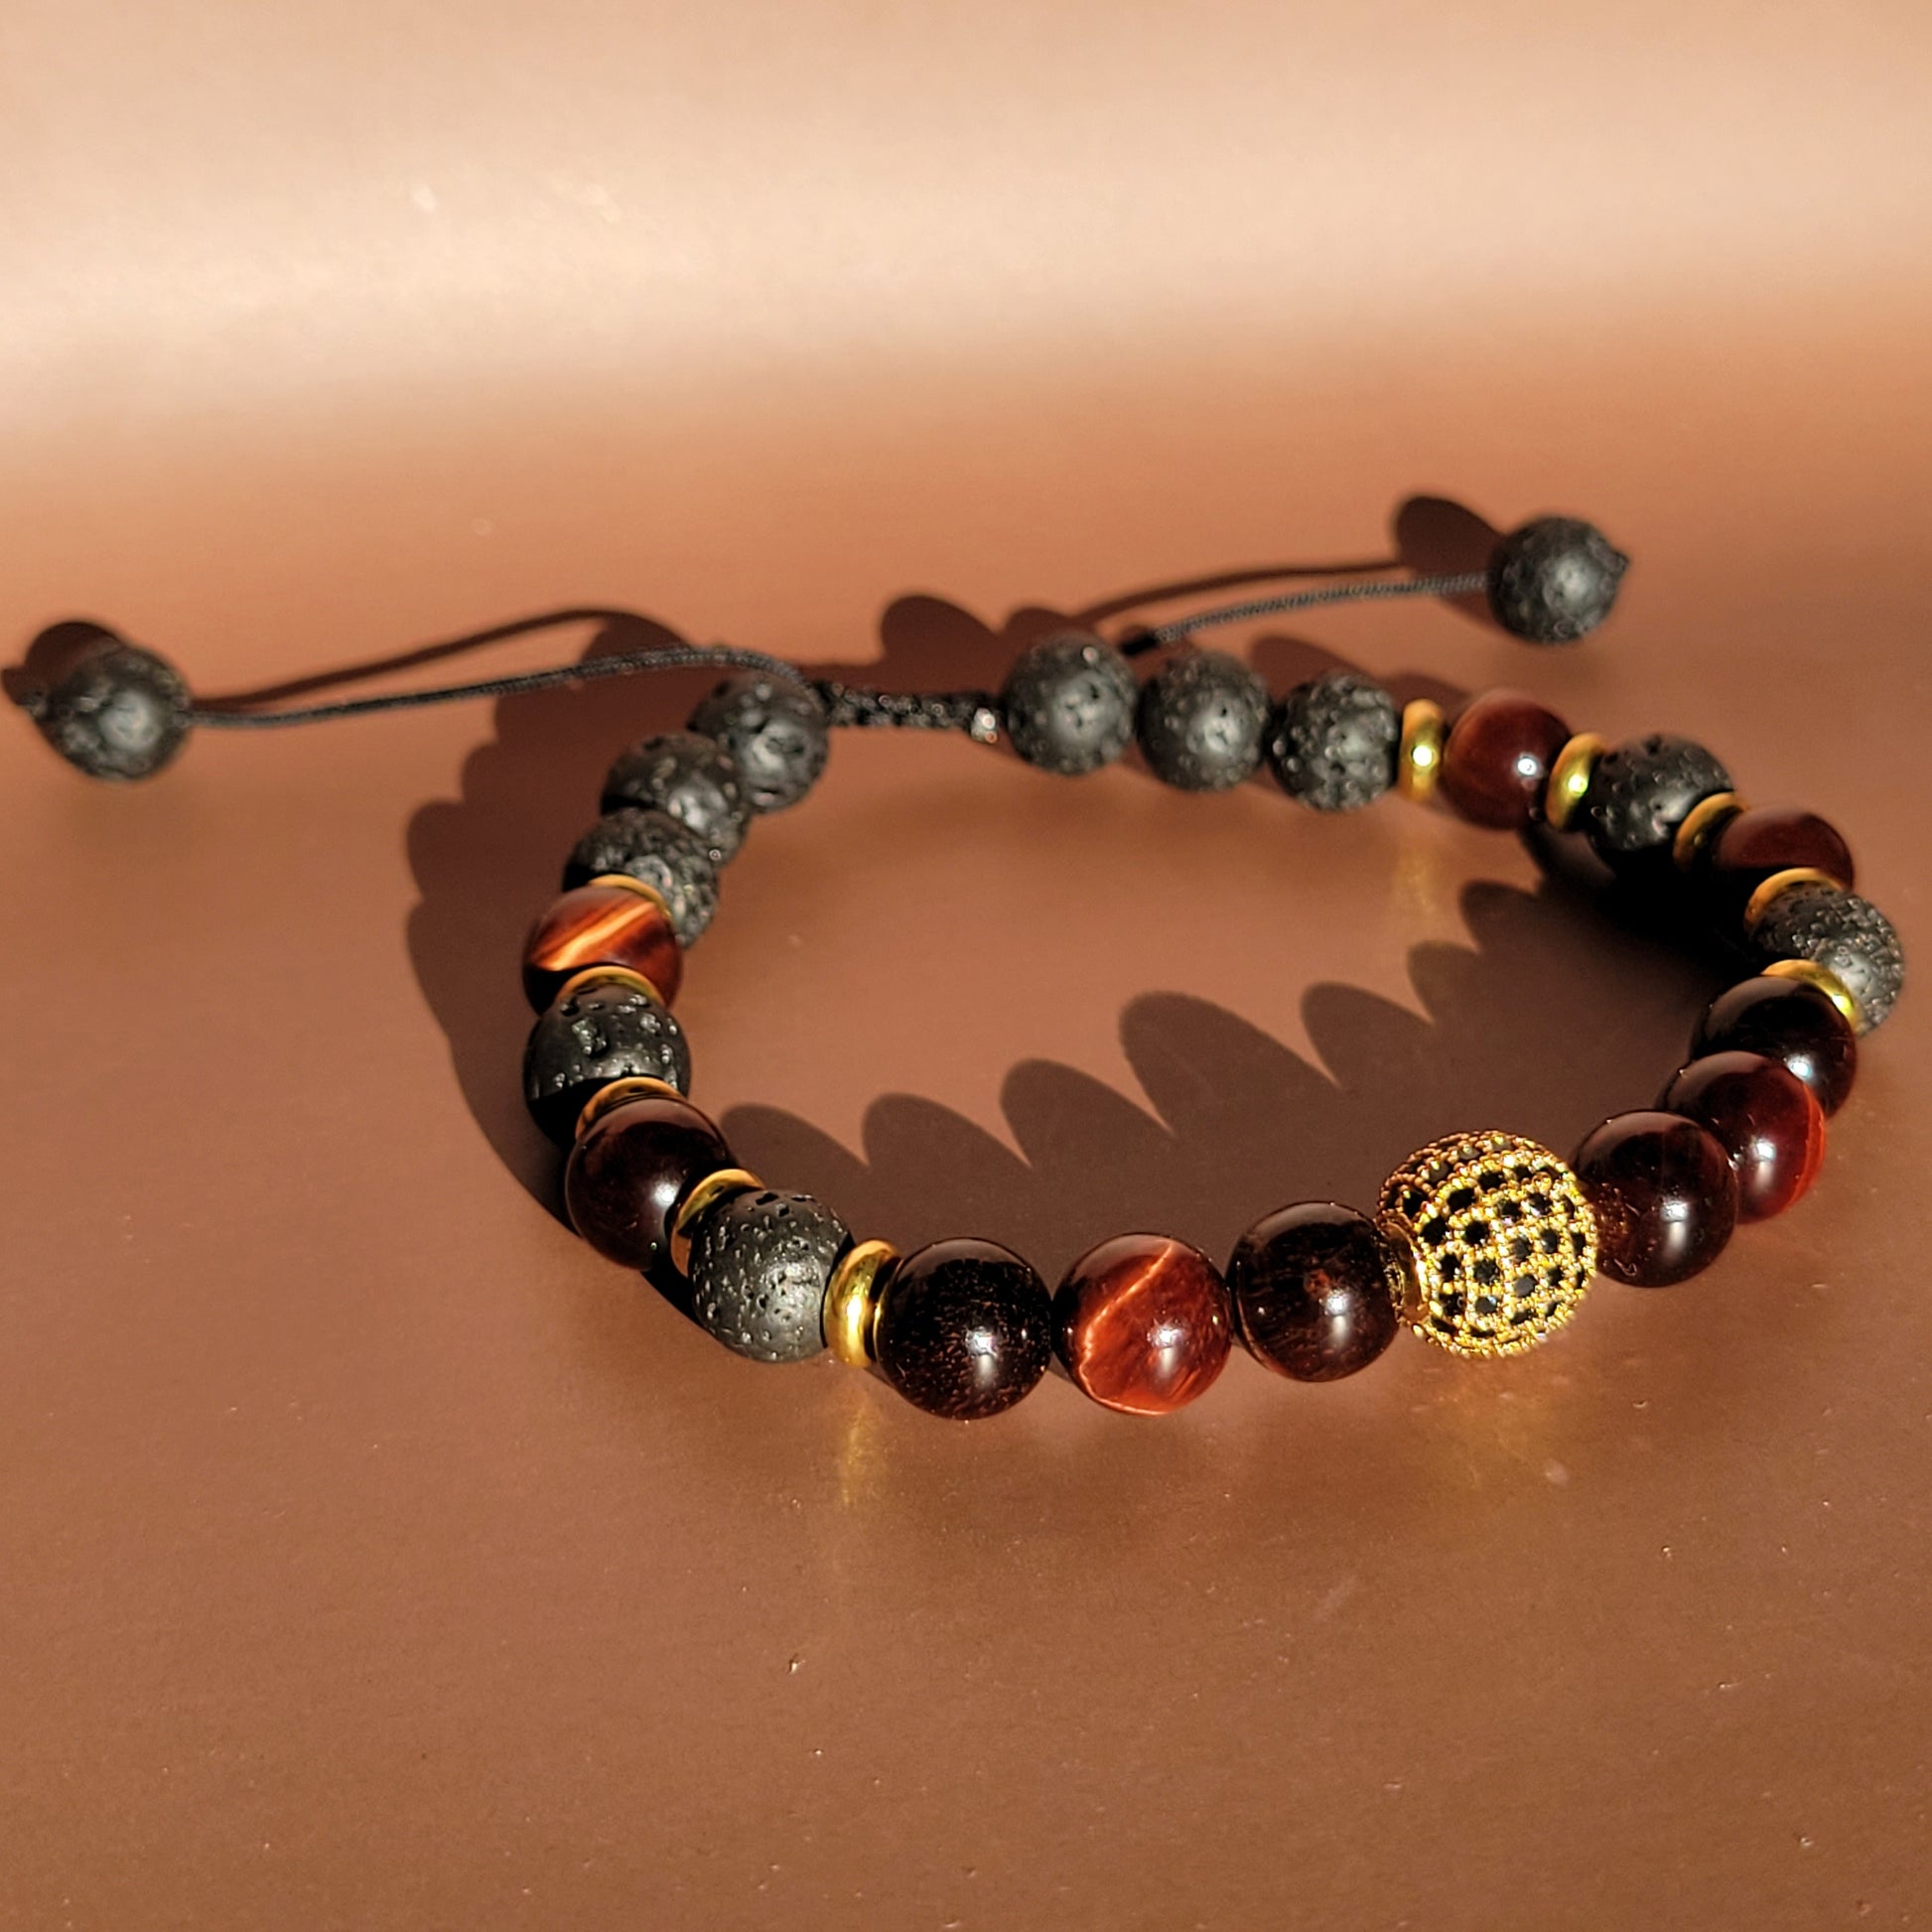 Natural Lava Beads Bracelet 4 Color Tiger Eye Stone with Matte Agate Hand  String (Red Tiger Eye, 8mm Beads x 8.5 inches)